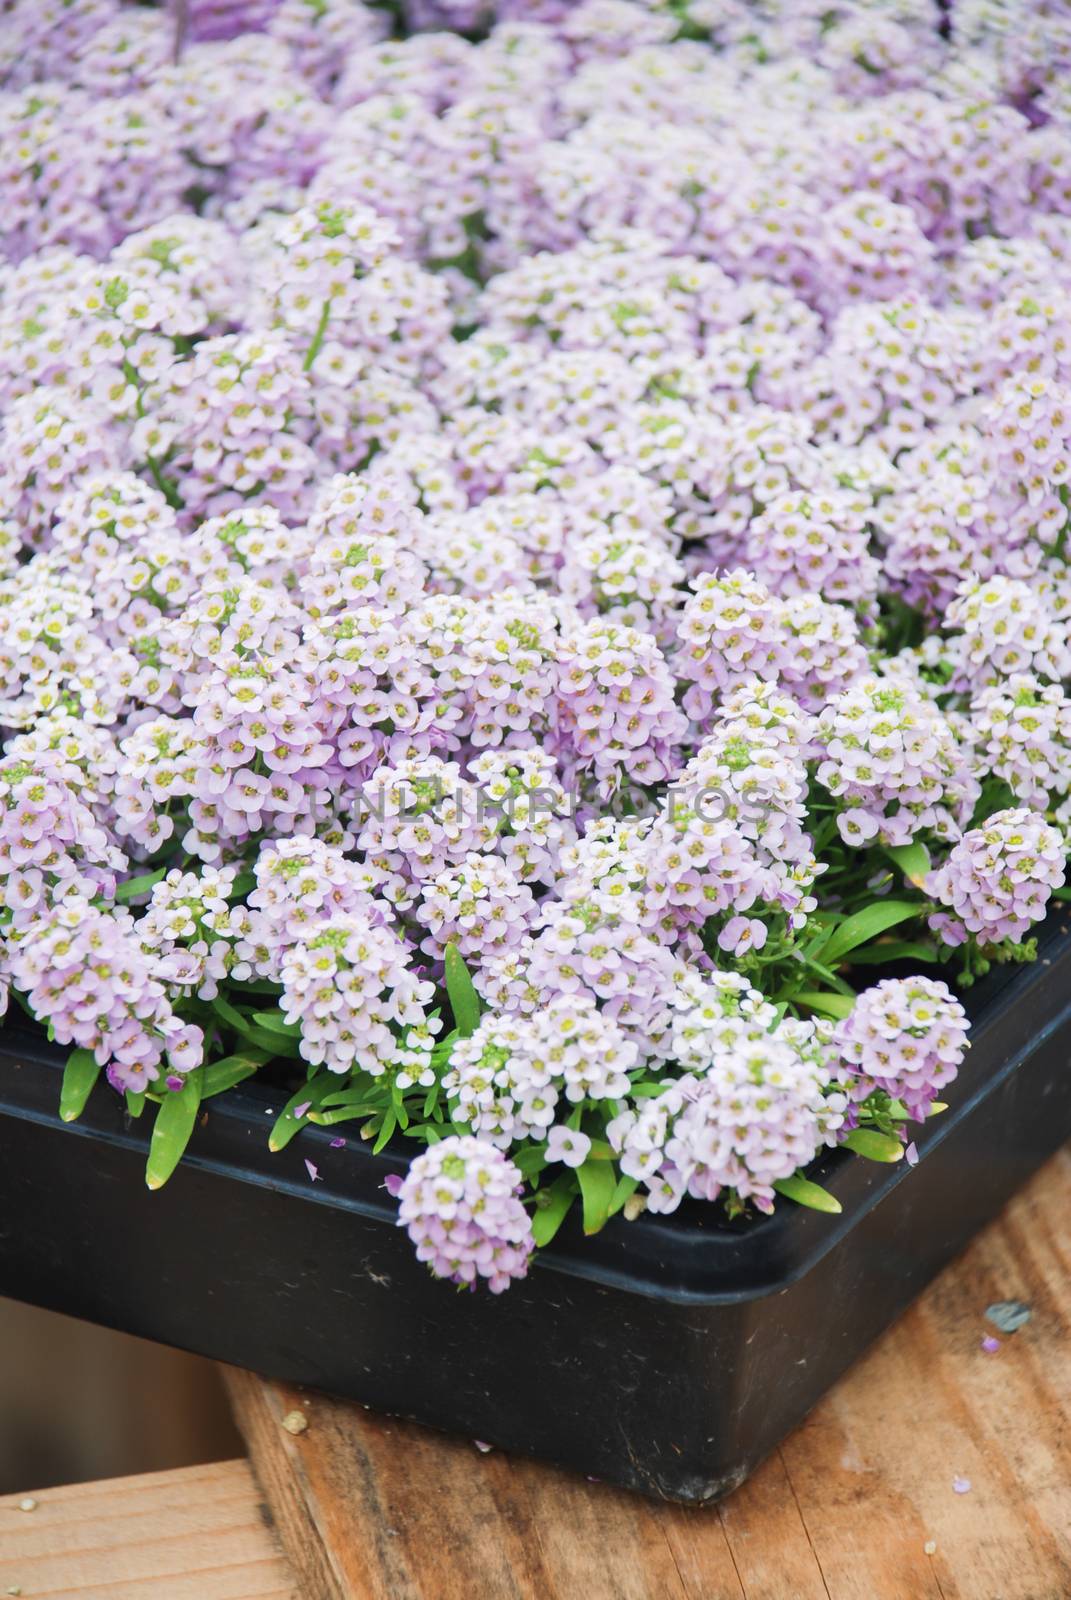 Alyssum flowers. Alyssum in sweet colors. Alyssum in a black tray on wood table, in a dense grounding in a greenhouse.